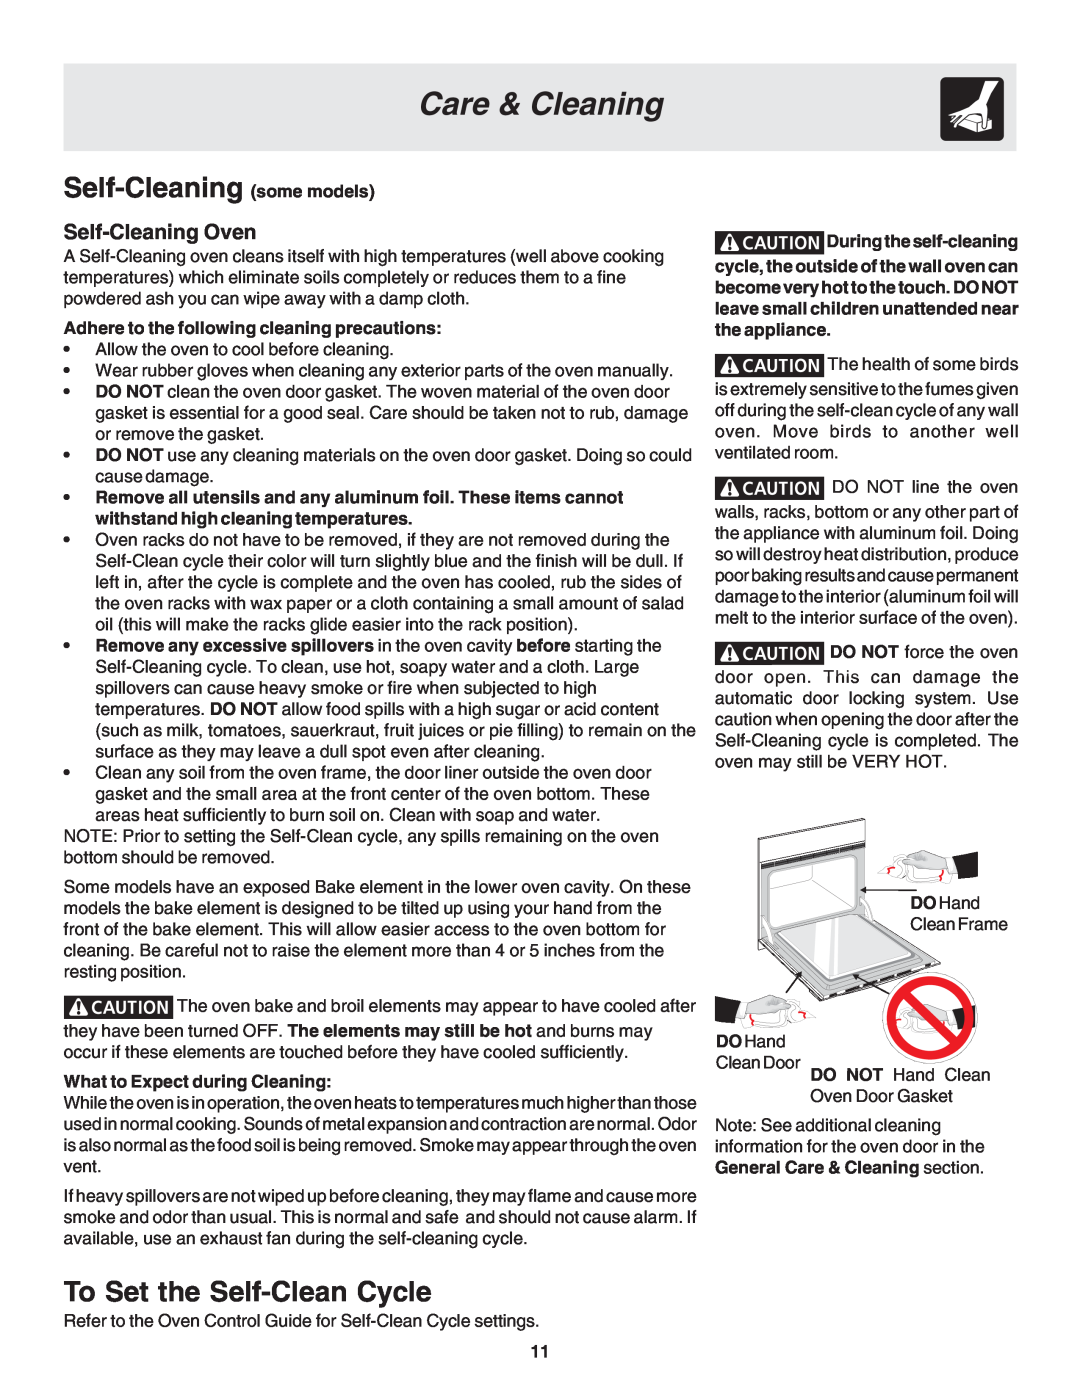 Frigidaire 318205115E warranty Self-Cleaning some models, To Set the Self-Clean Cycle, Self-Cleaning Oven, Care & Cleaning 